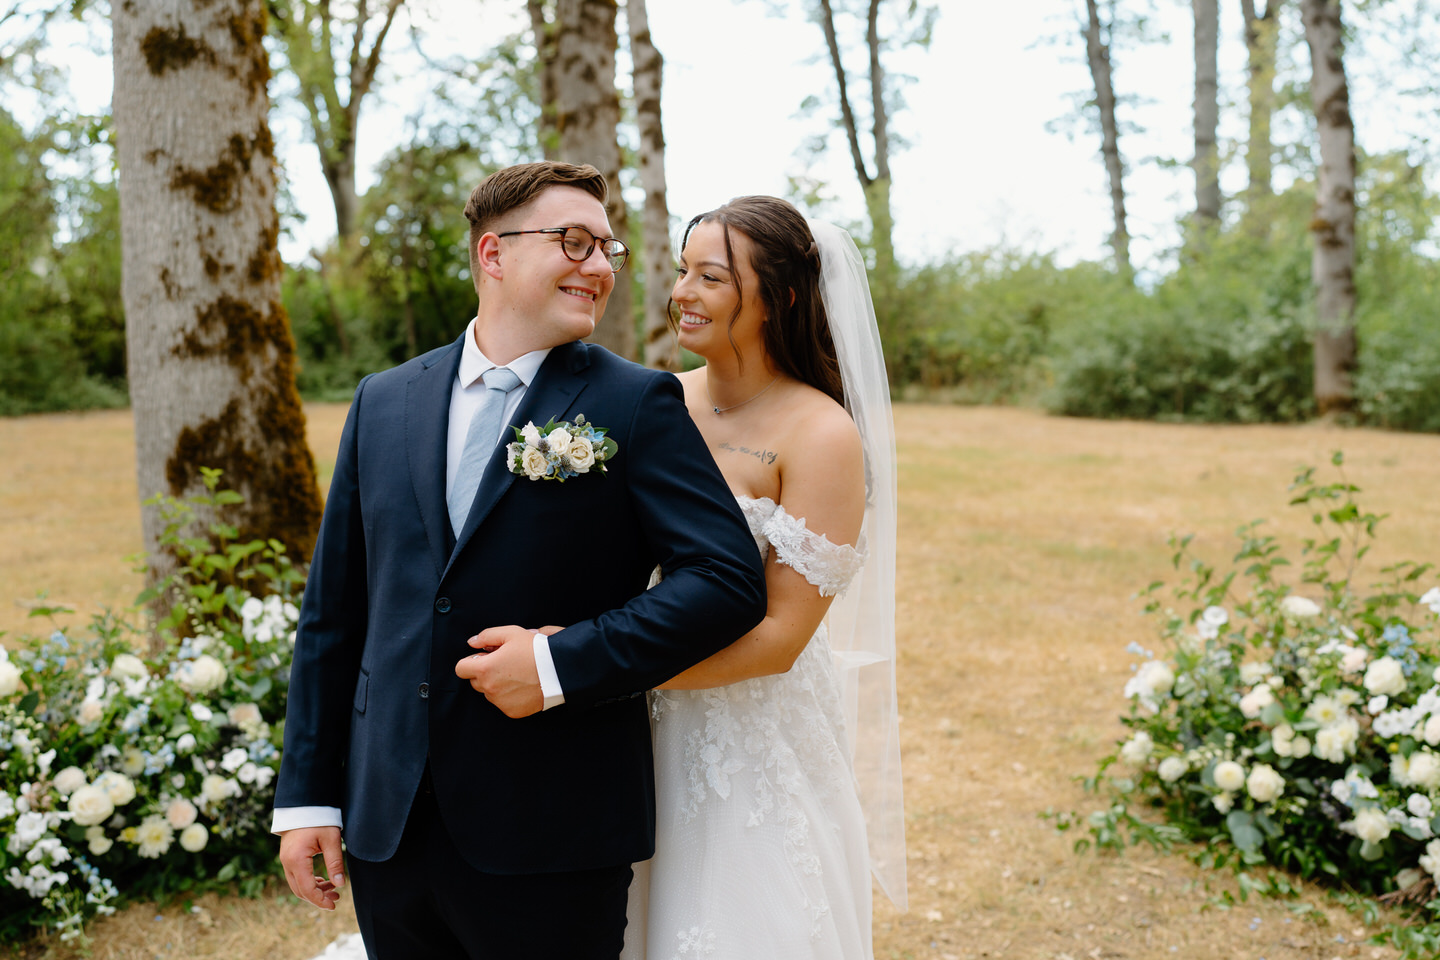 Bride and Groom at The Farm & Orchard Wedding Venue in Corvallis, Oregon in August